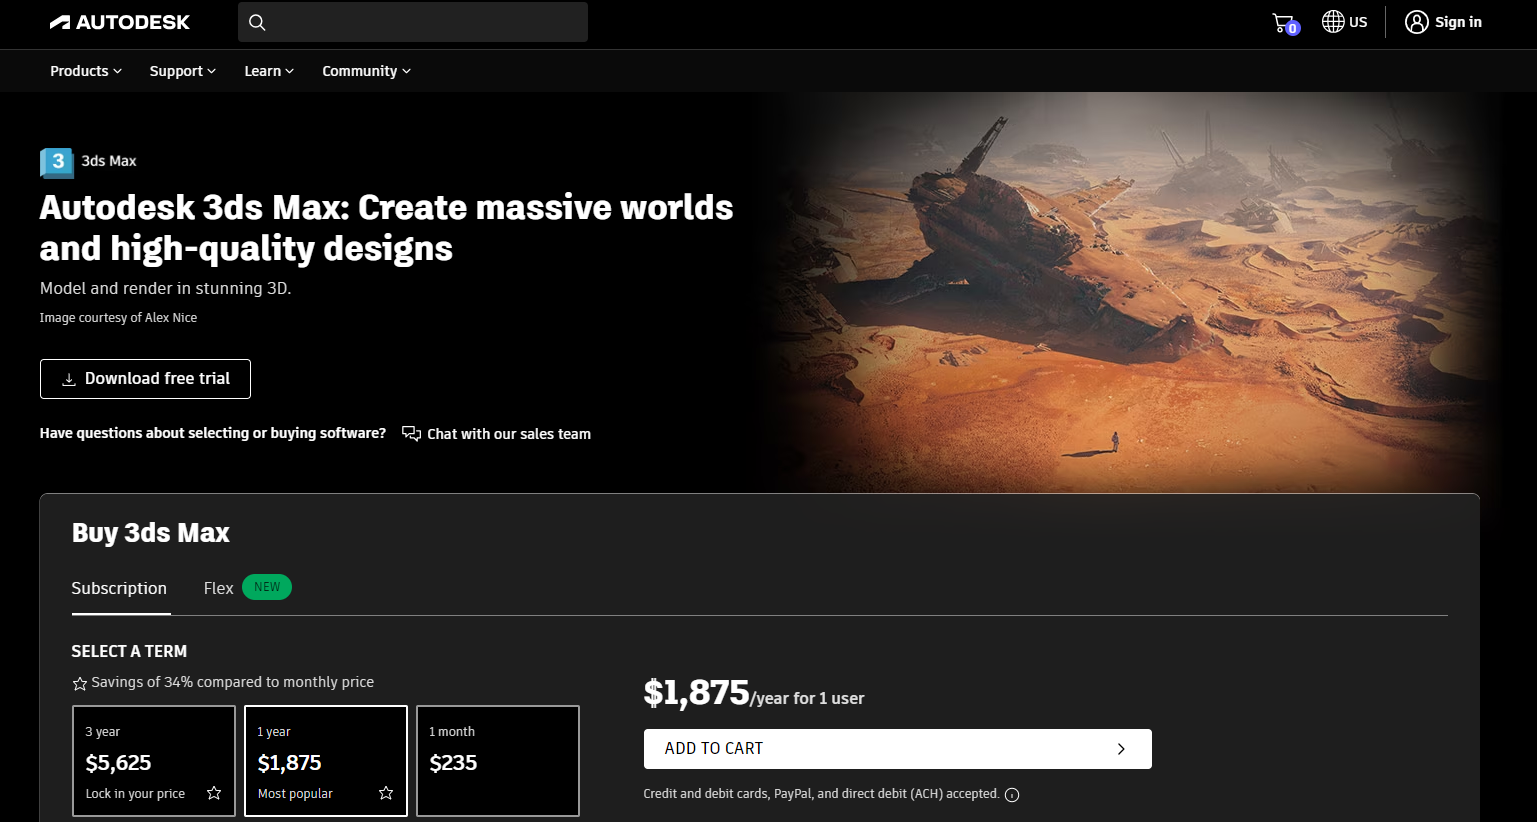 3DS Max by Autodesk homepage.